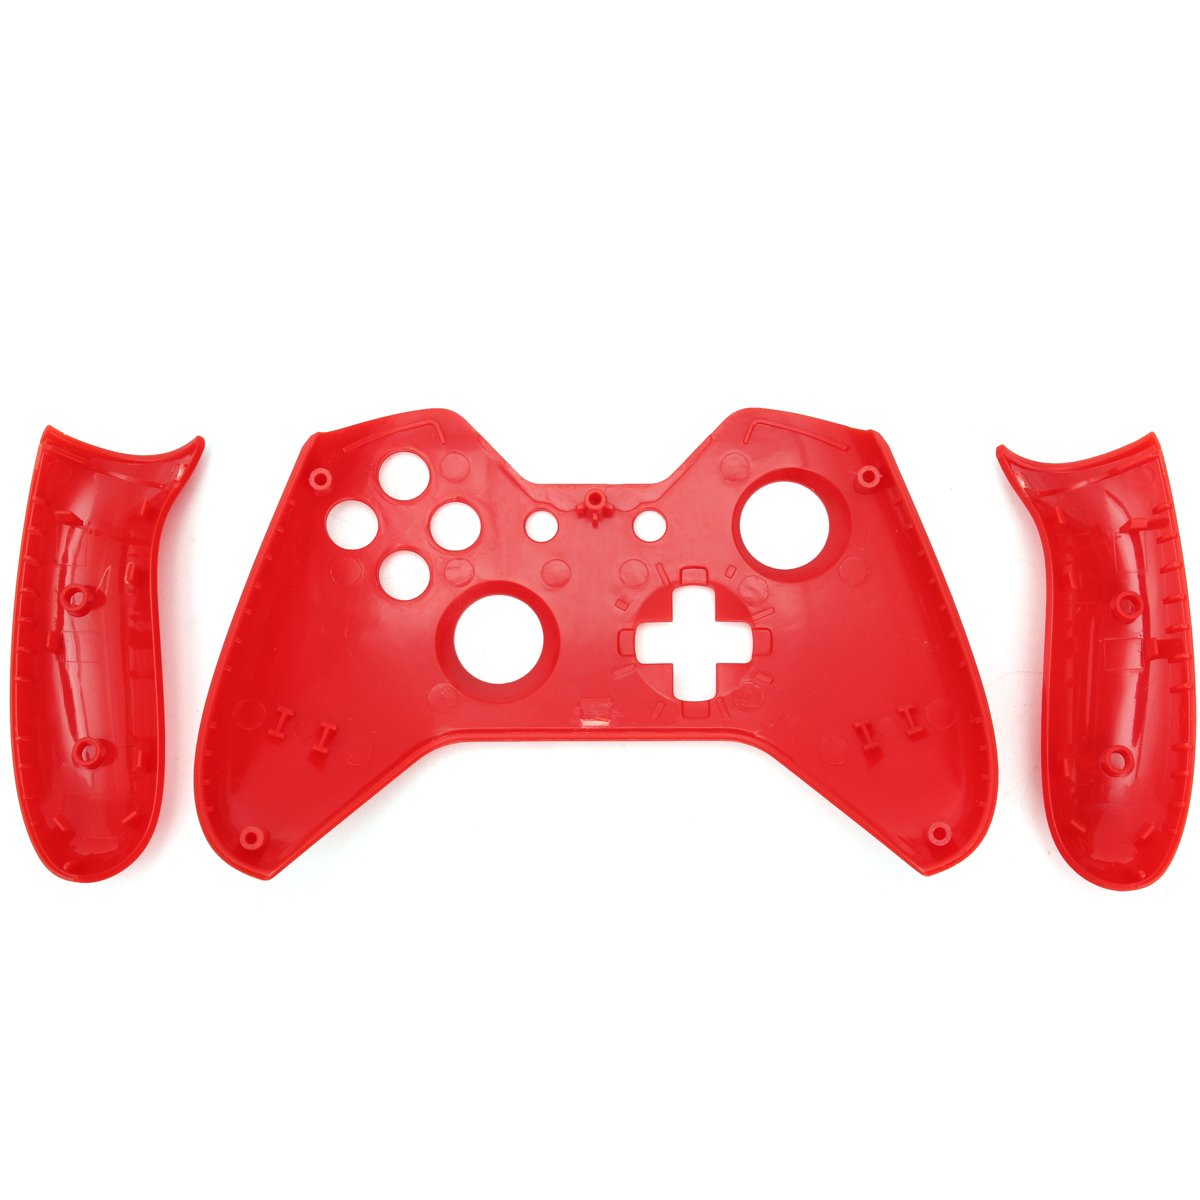 Soft Touch Front Housing Shell Faceplate Replacement for Xbox One Controller 2